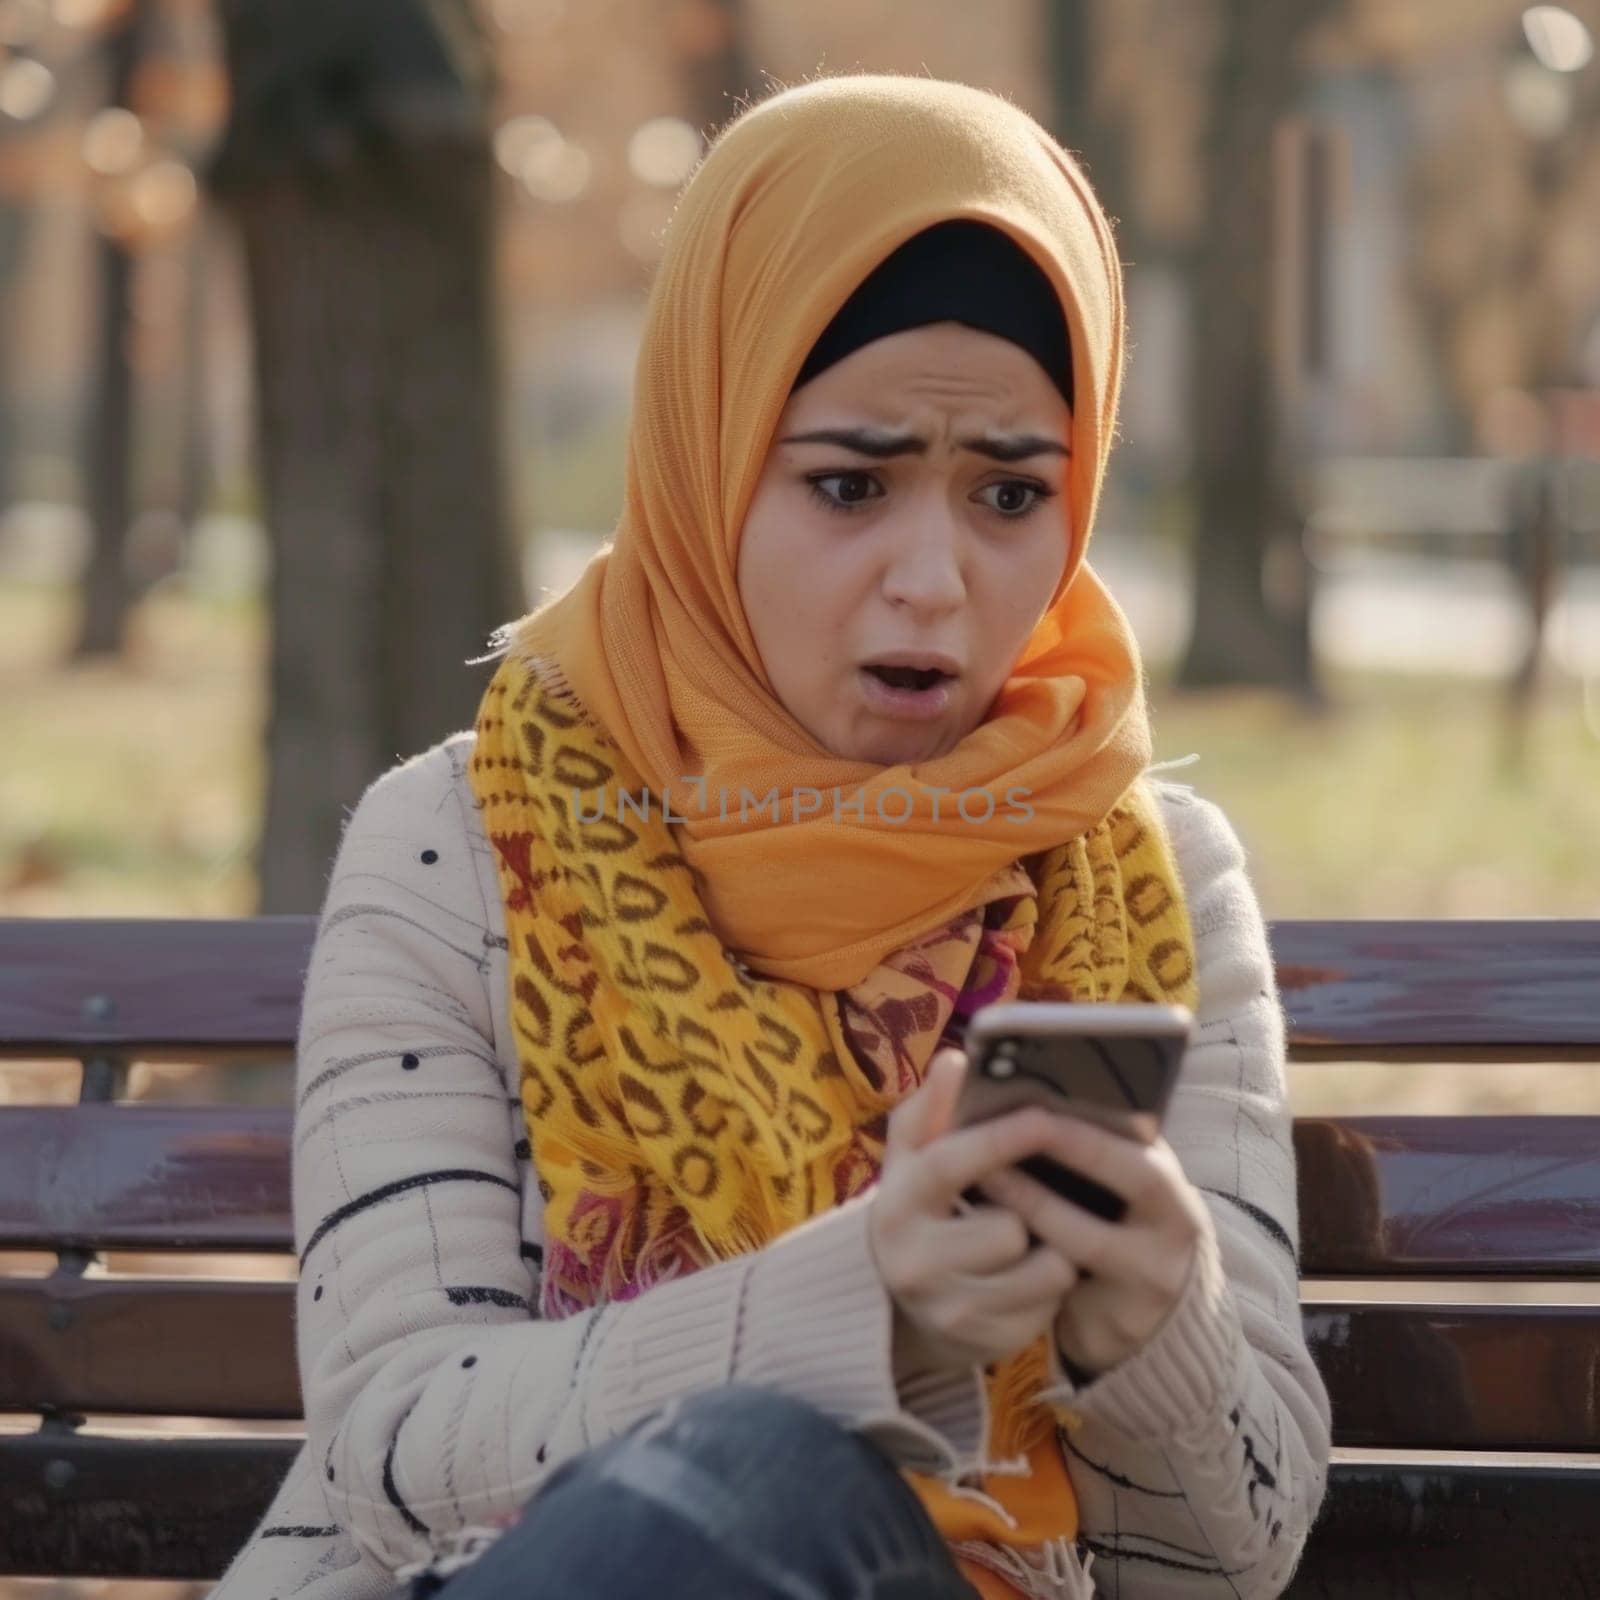 Arab girl is shocked and worried about negative news reading on the mobile phone while outdoors by papatonic